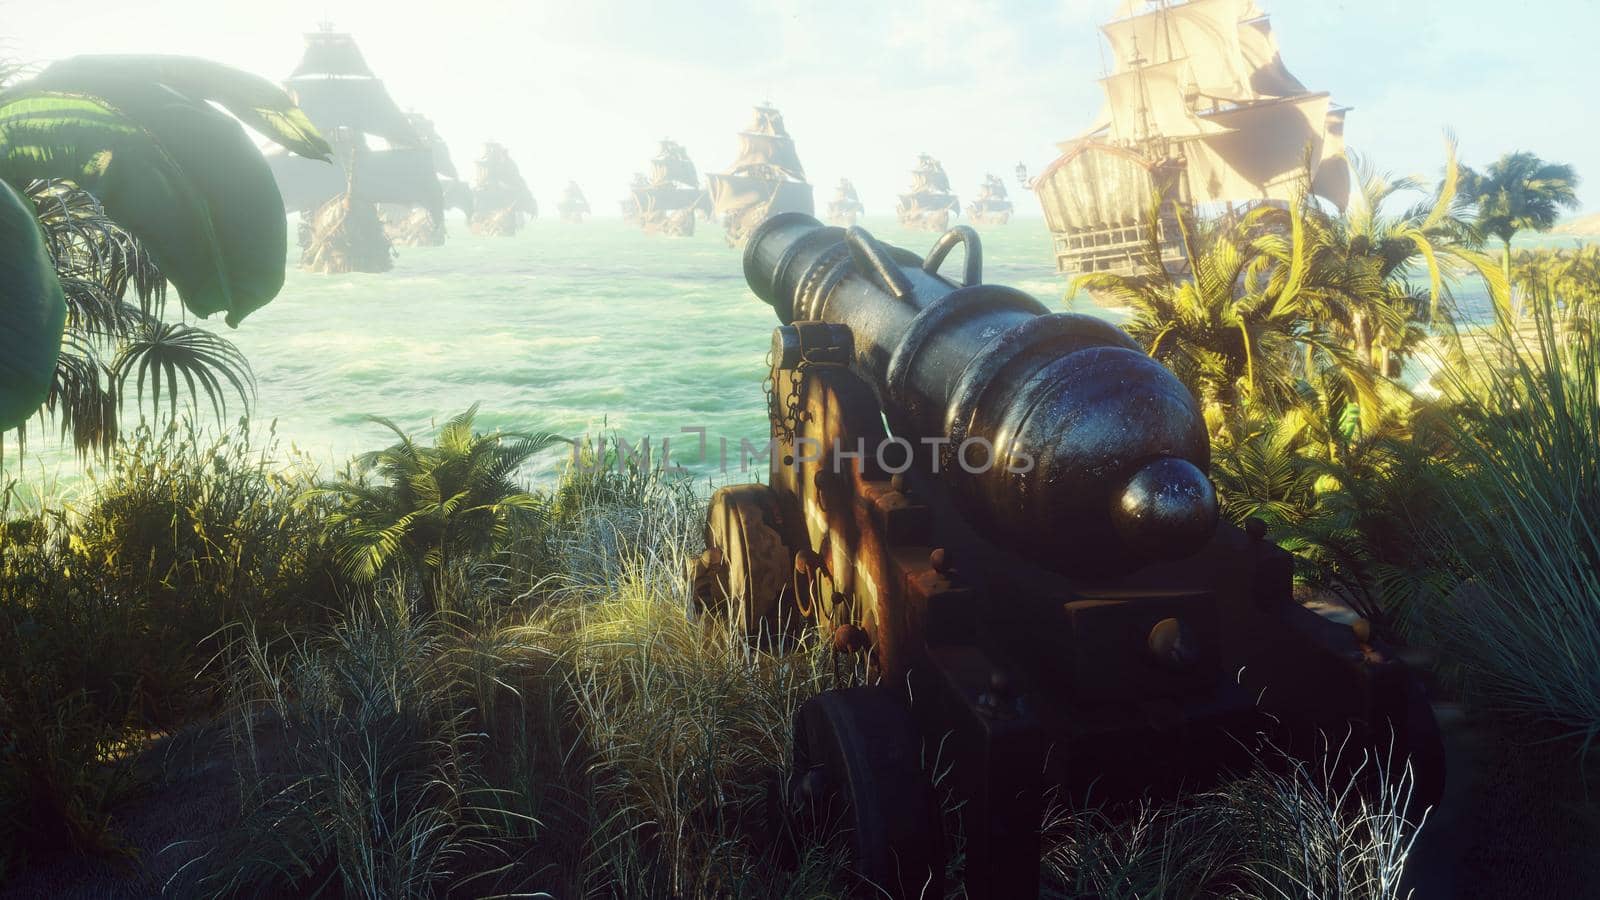 The medieval cannon is ready for battle against the ship's fleet. A cannon in the middle of green grass on an island, on a Sunny morning. View of the green tropical island on a cloudy morning.